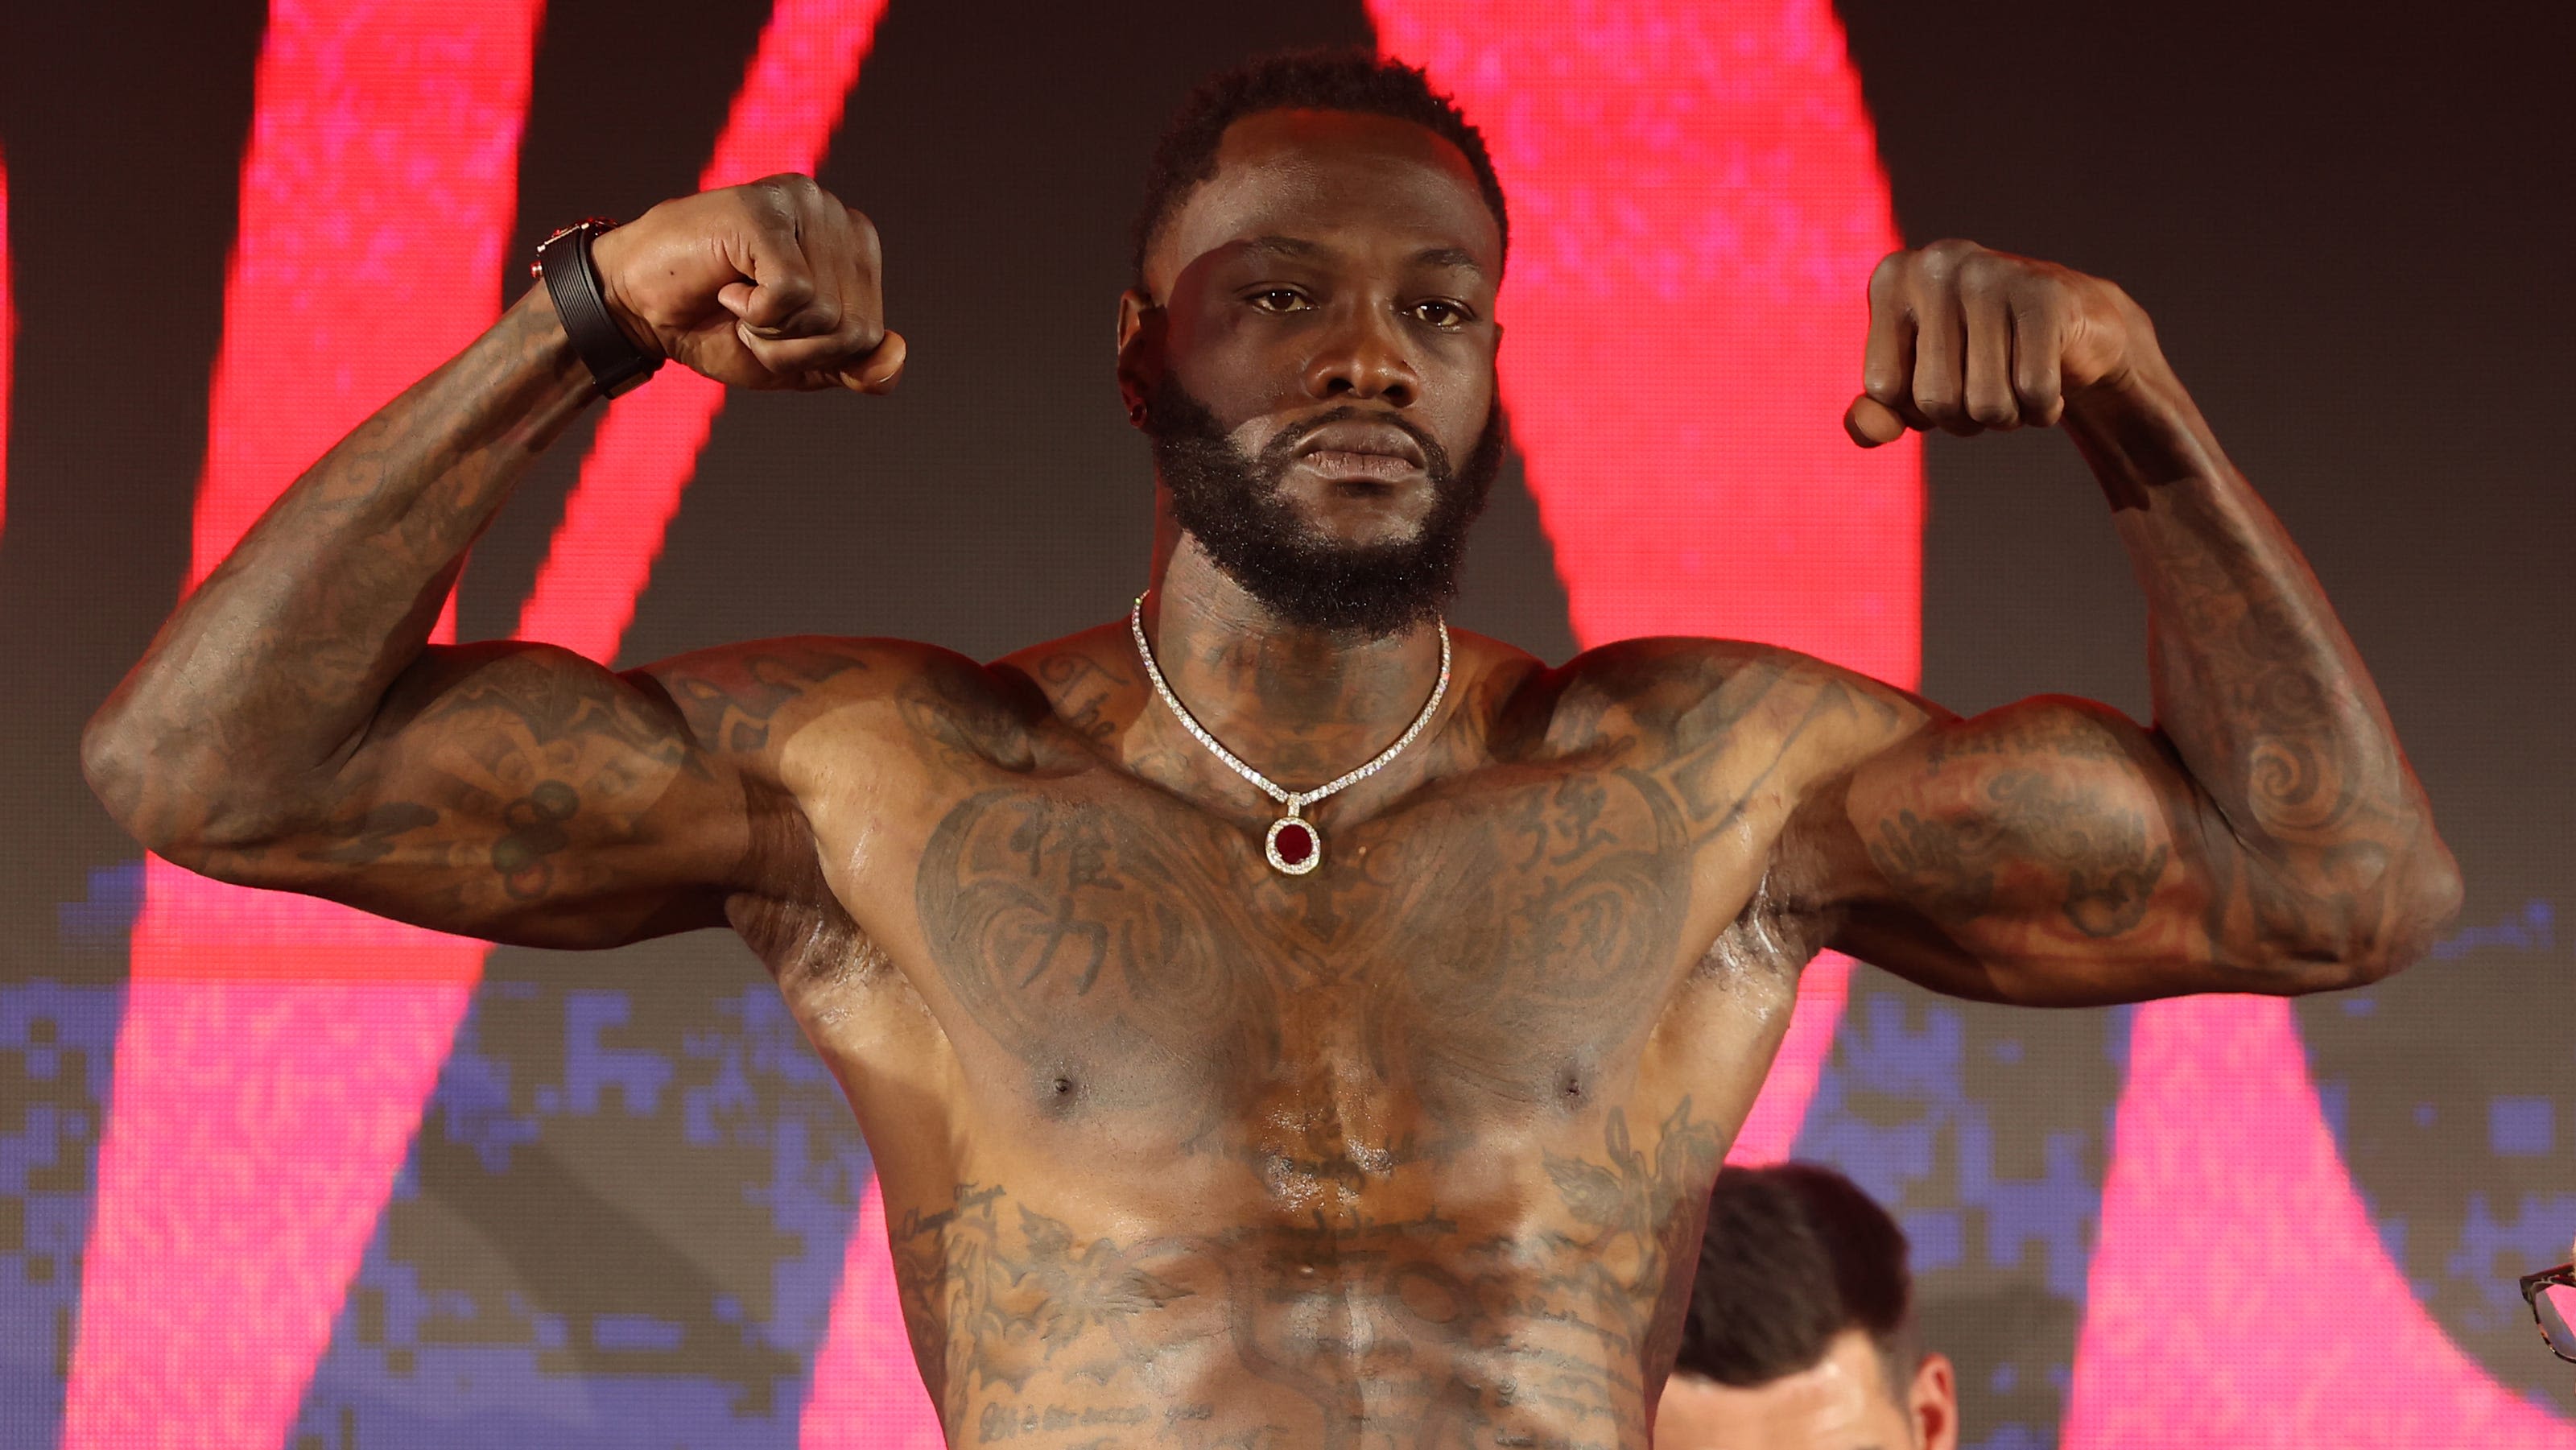 Deontay Wilder's fiancée gets temporary restraining order after she details alleged abuse